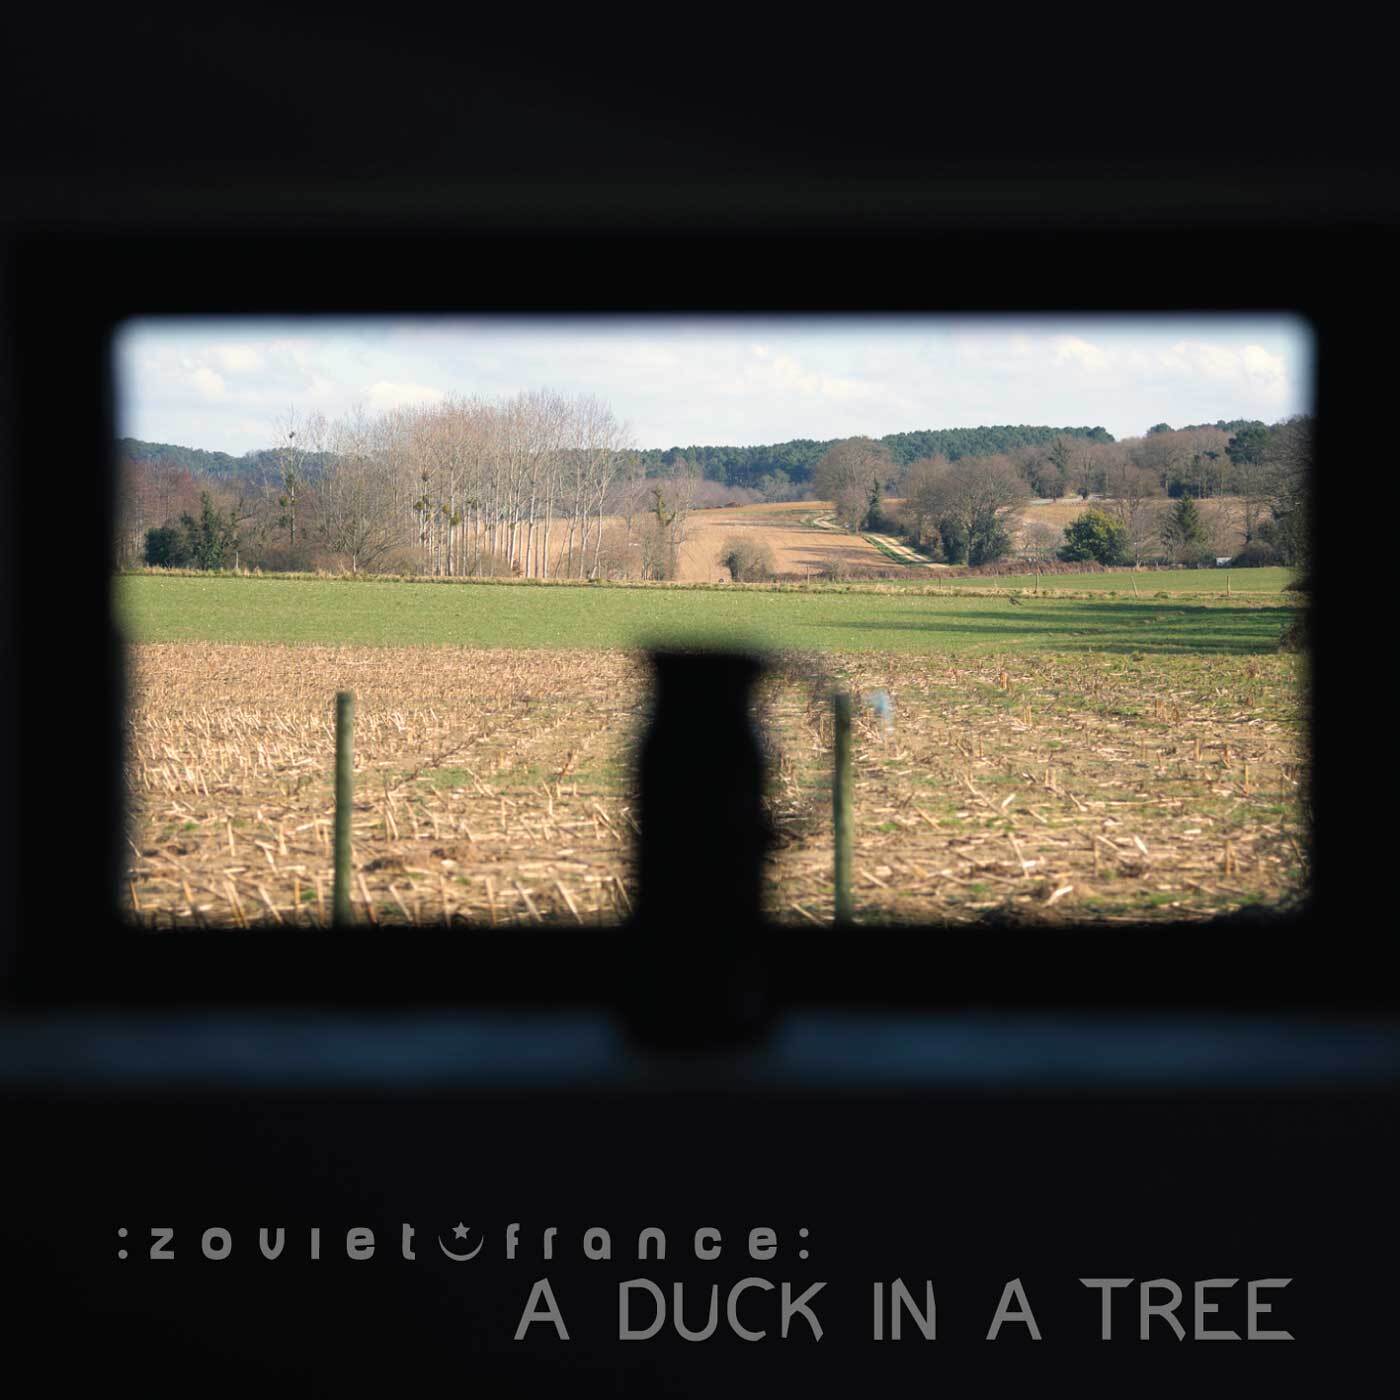 A-Duck-in-a-Tree-2014-07-05-_-Turn-Left-